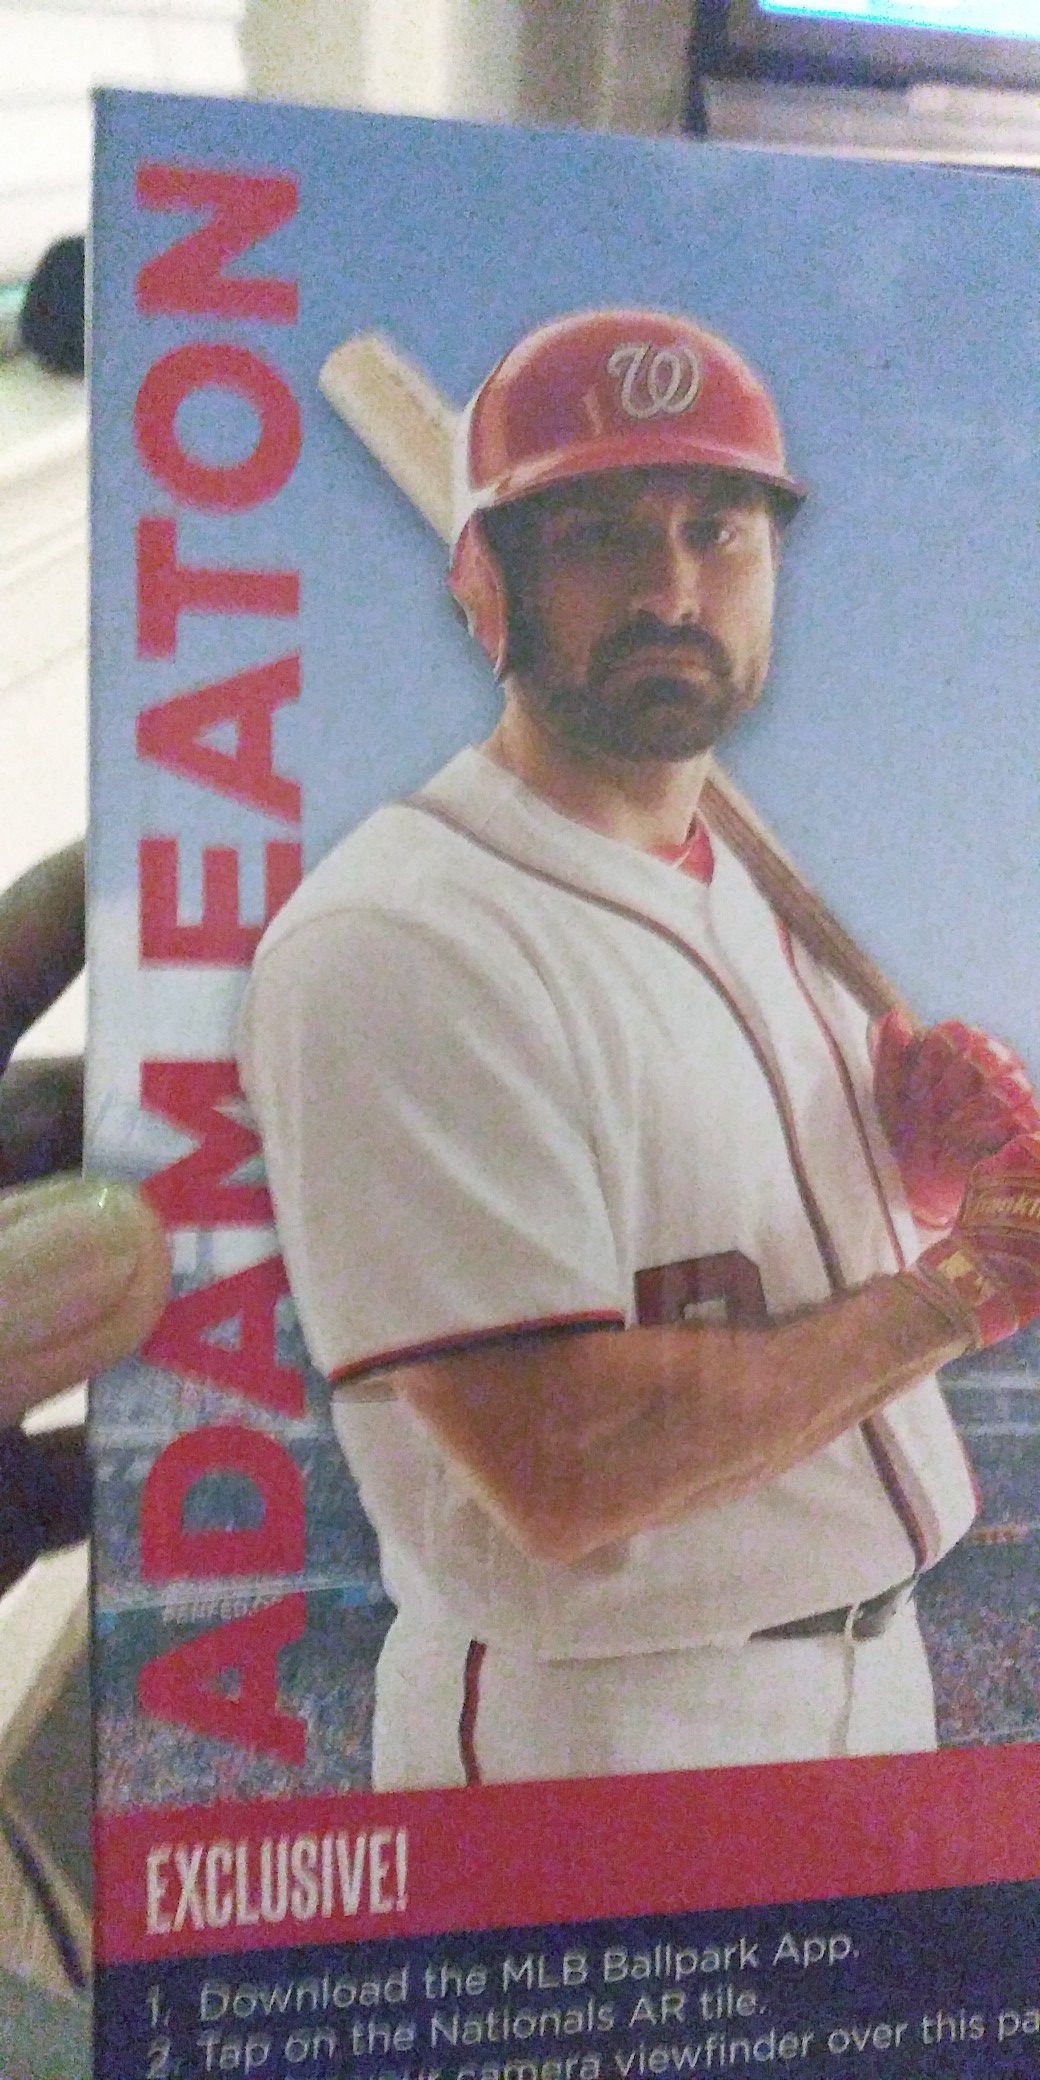 Autograph 2019 Washington Nationals BOBBLEHEADS ADAM EATON i got 2 of them Collectibles if you are a national fan two for the price of one